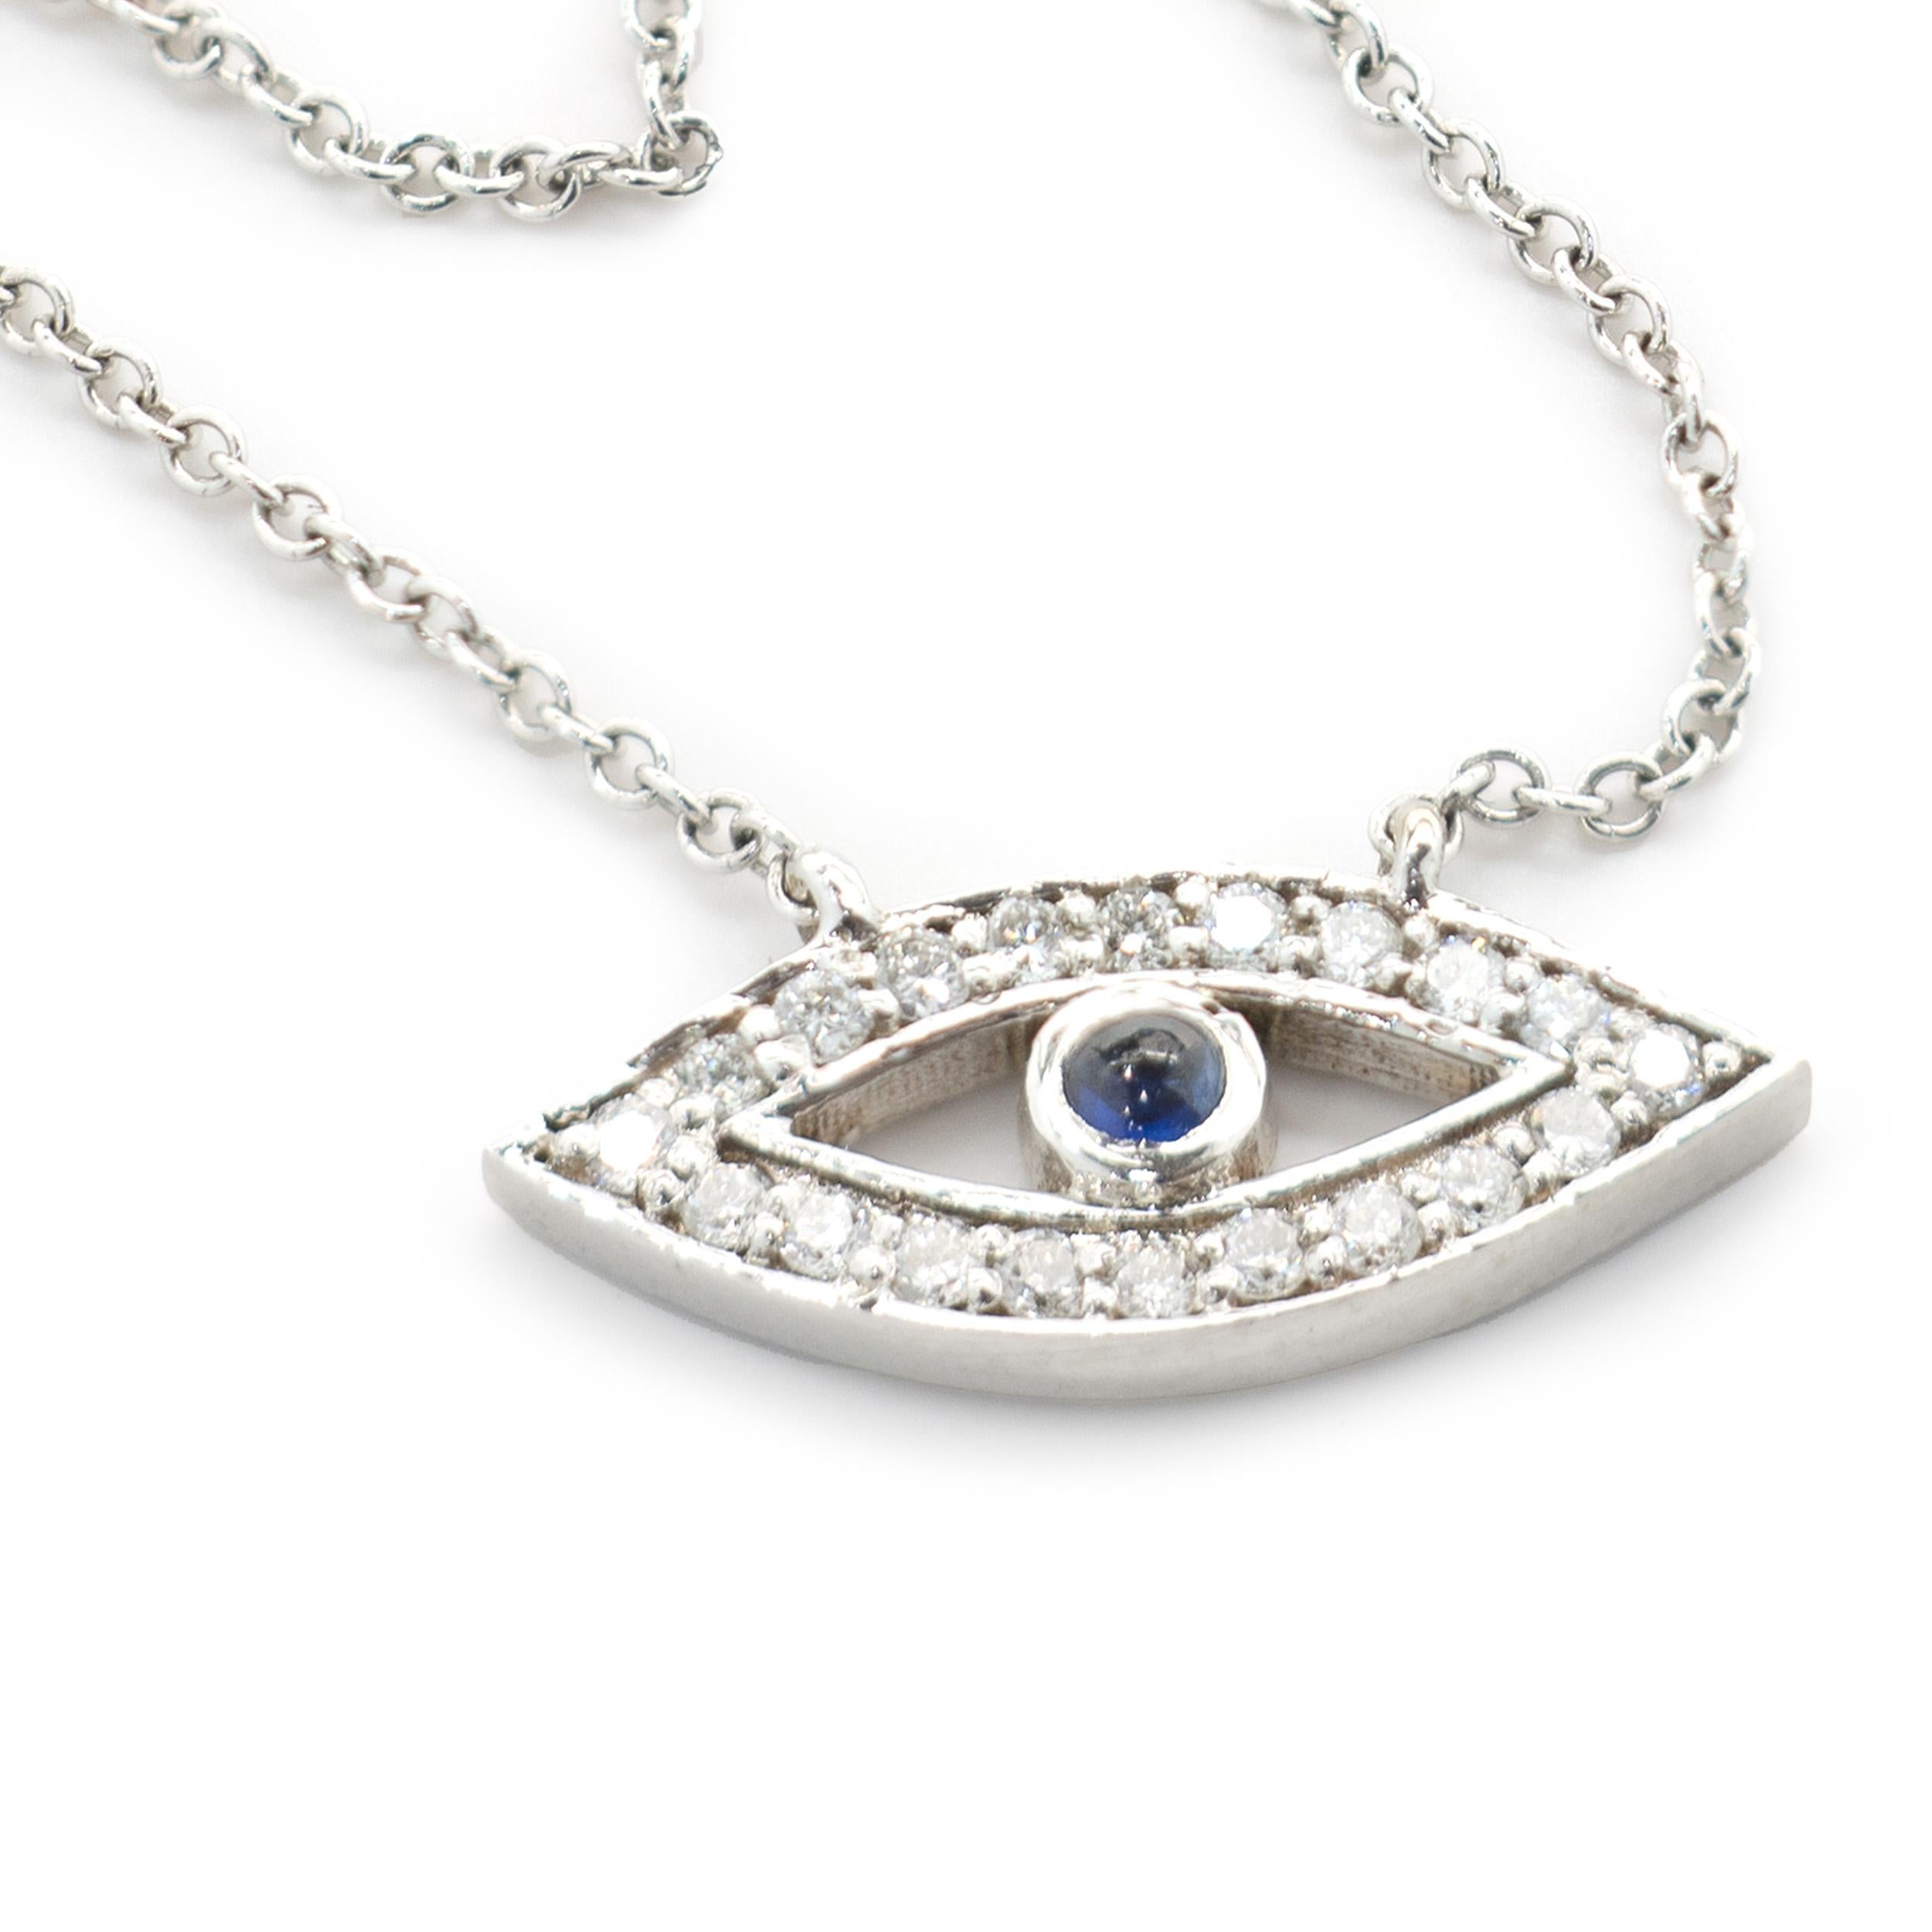 14 Karat White Gold Diamond and Sapphire Evil Eye Necklace In Excellent Condition For Sale In Scottsdale, AZ